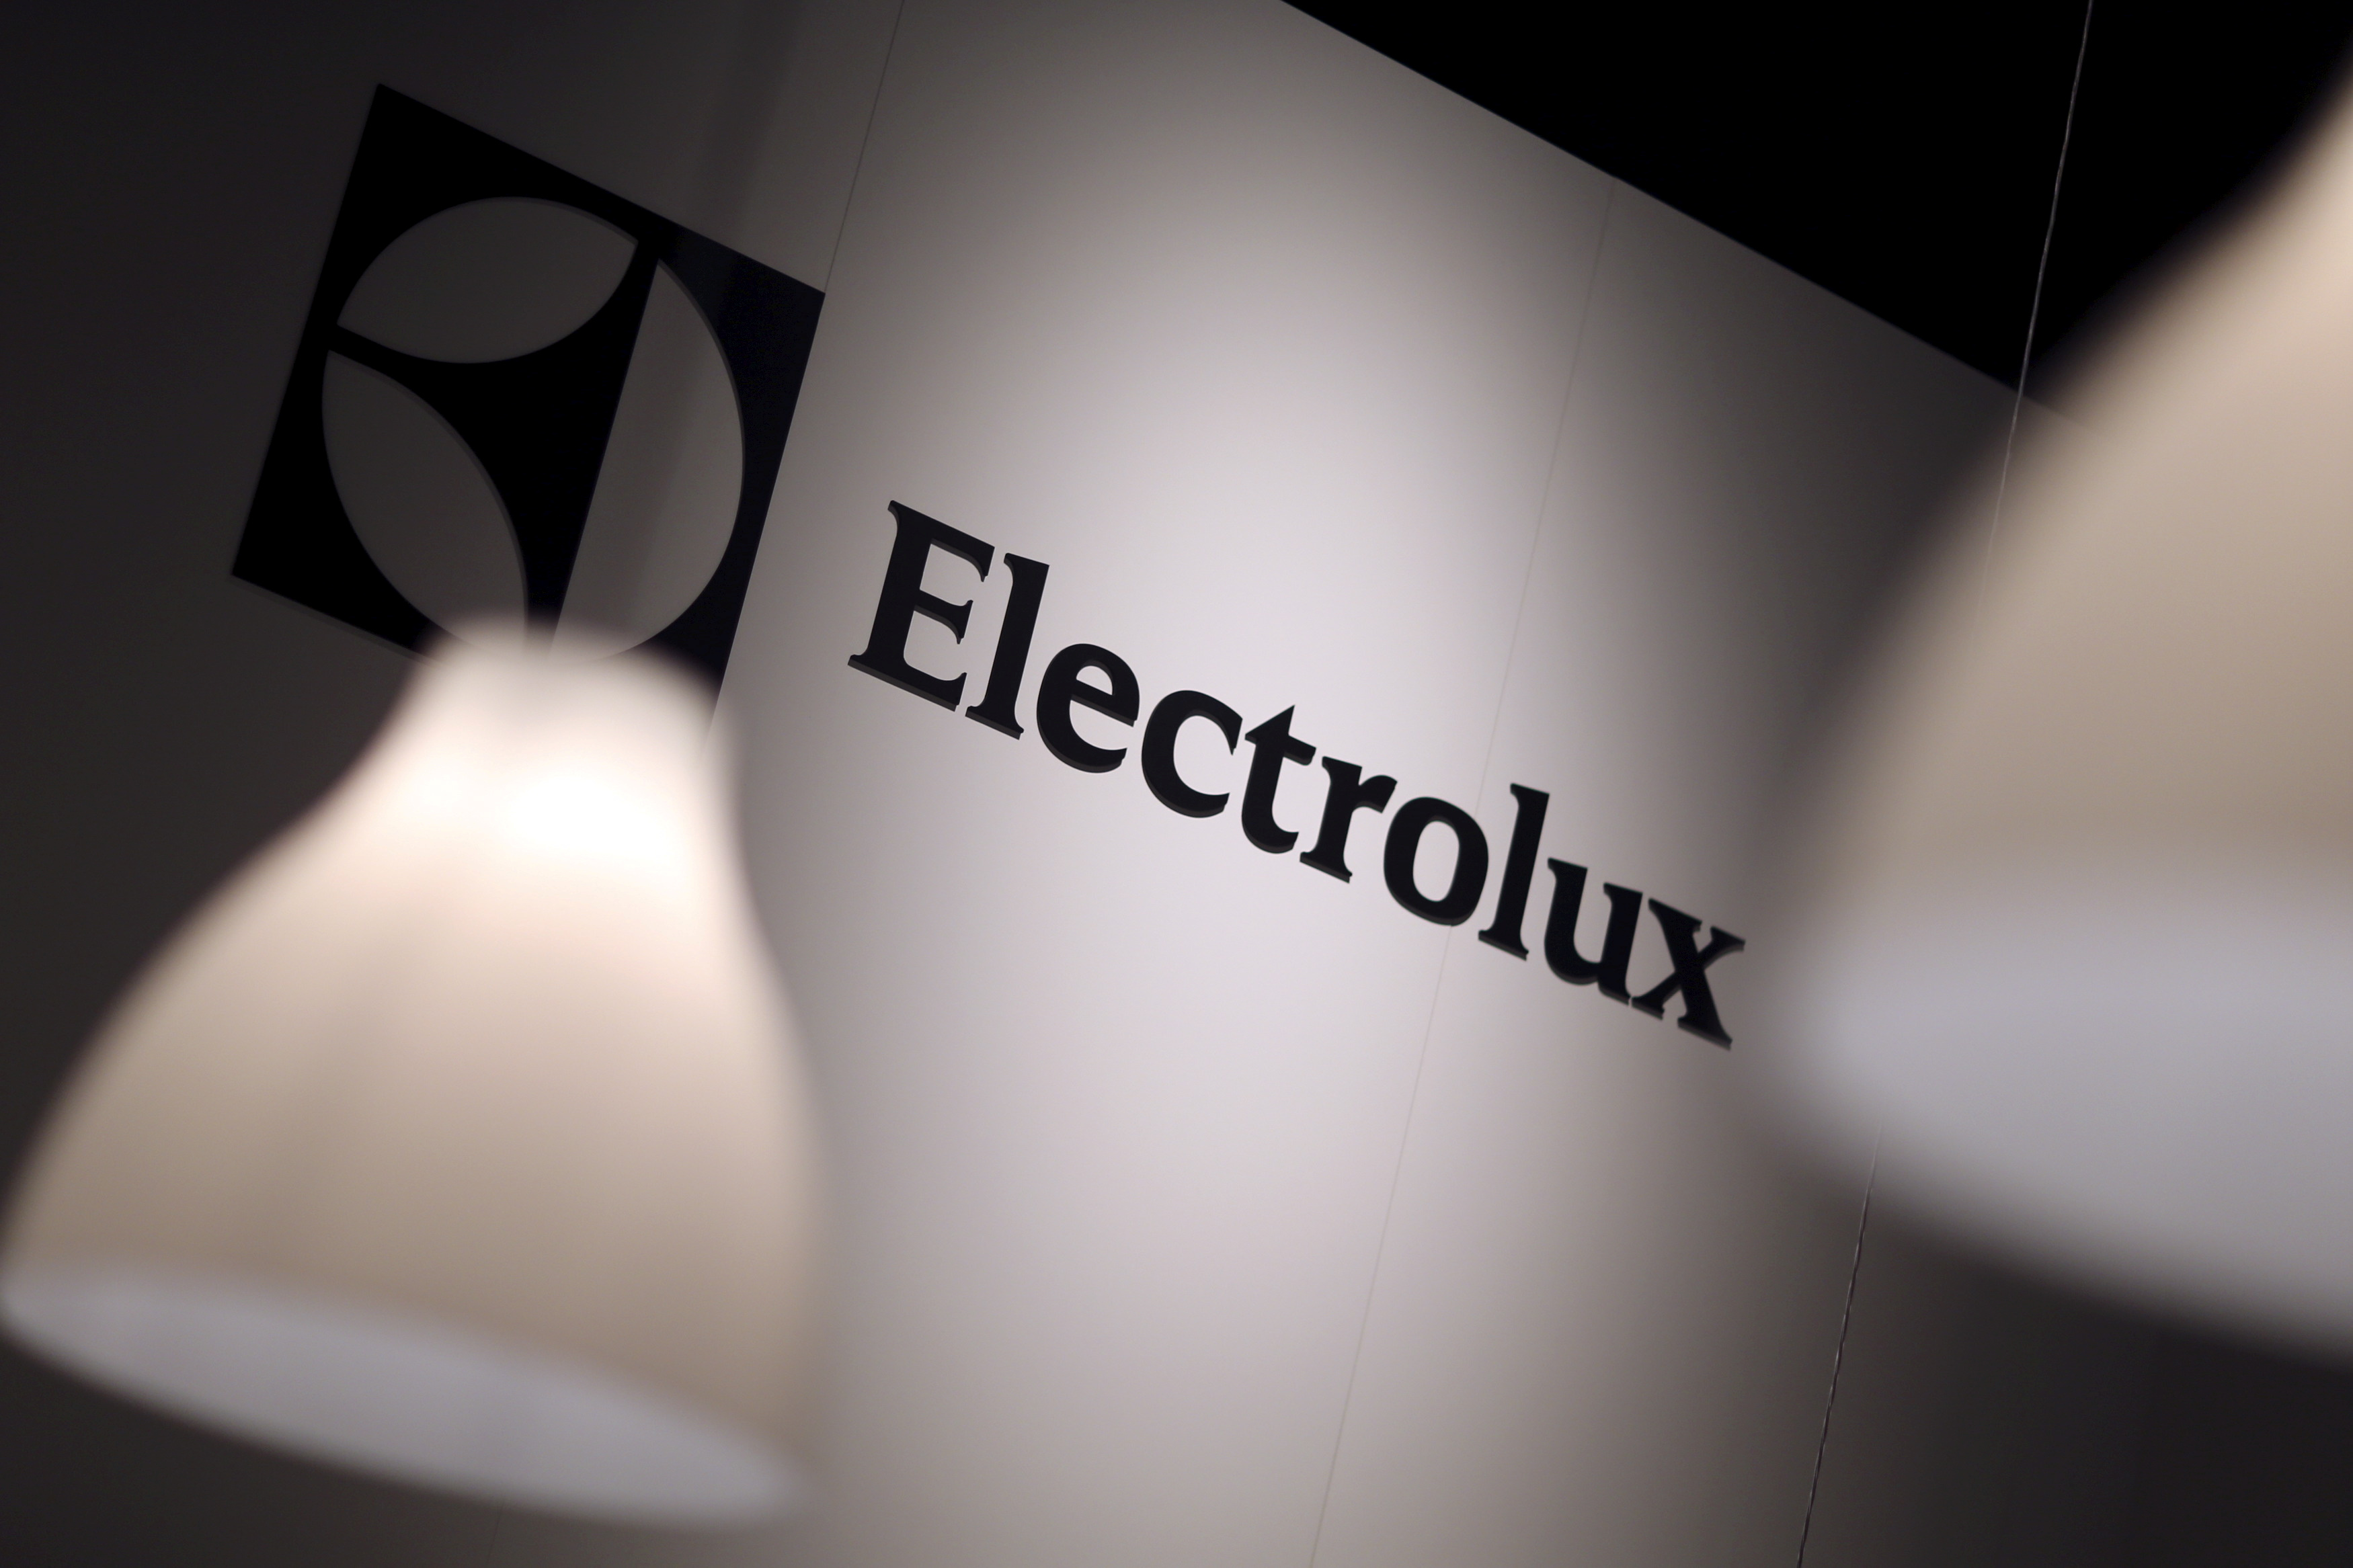 The Electrolux logo is seen during the IFA Electronics show in Berlin, Germany